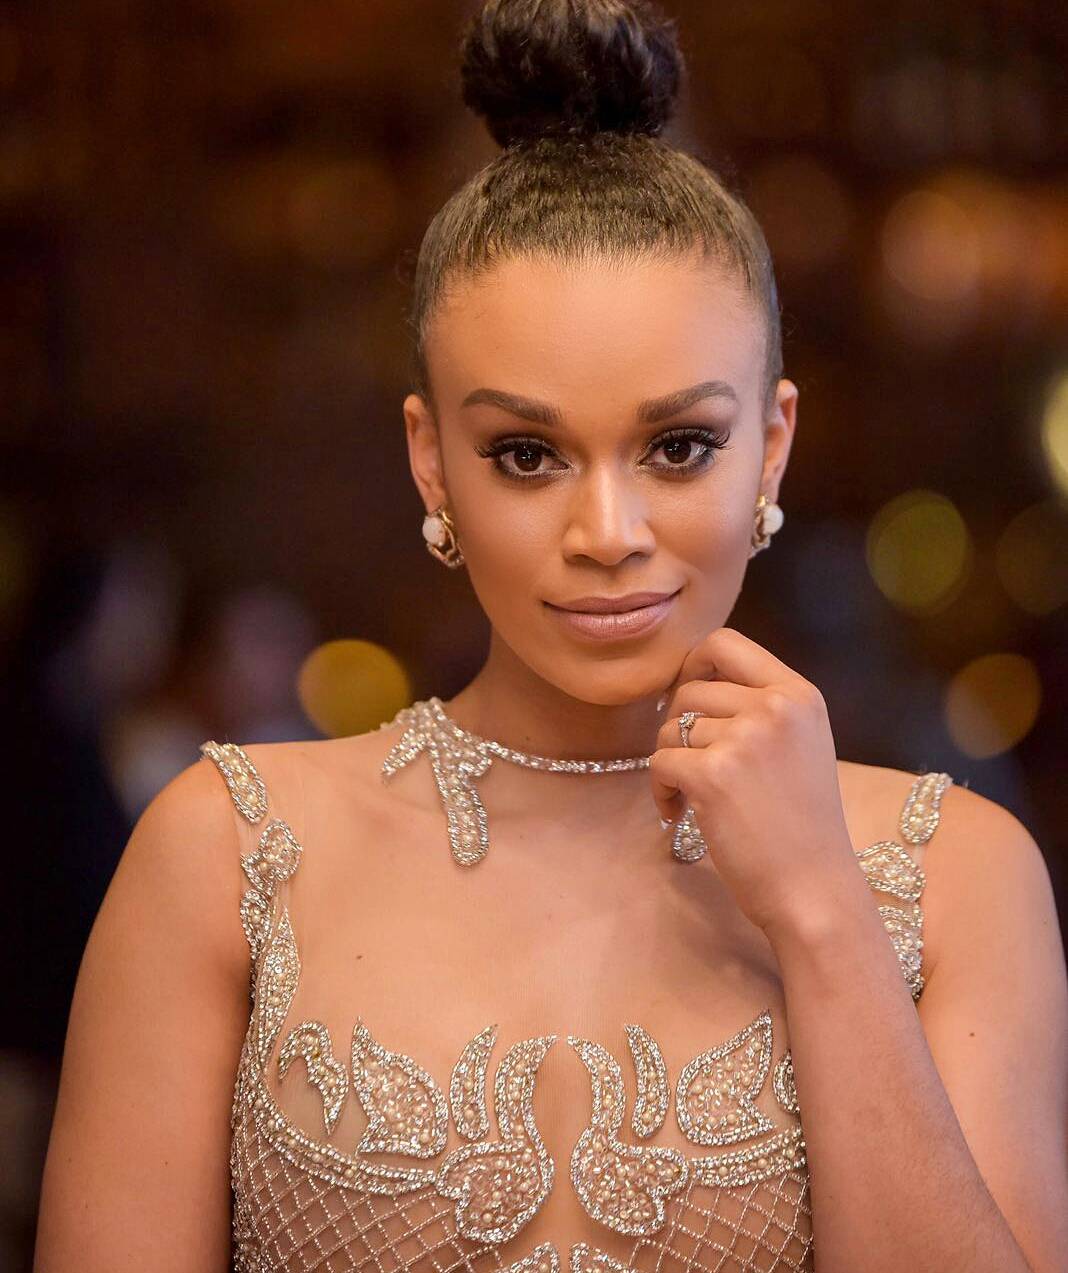 Check Out South African Media Personality Pearl Thusi’s Slay Game Celebrity...